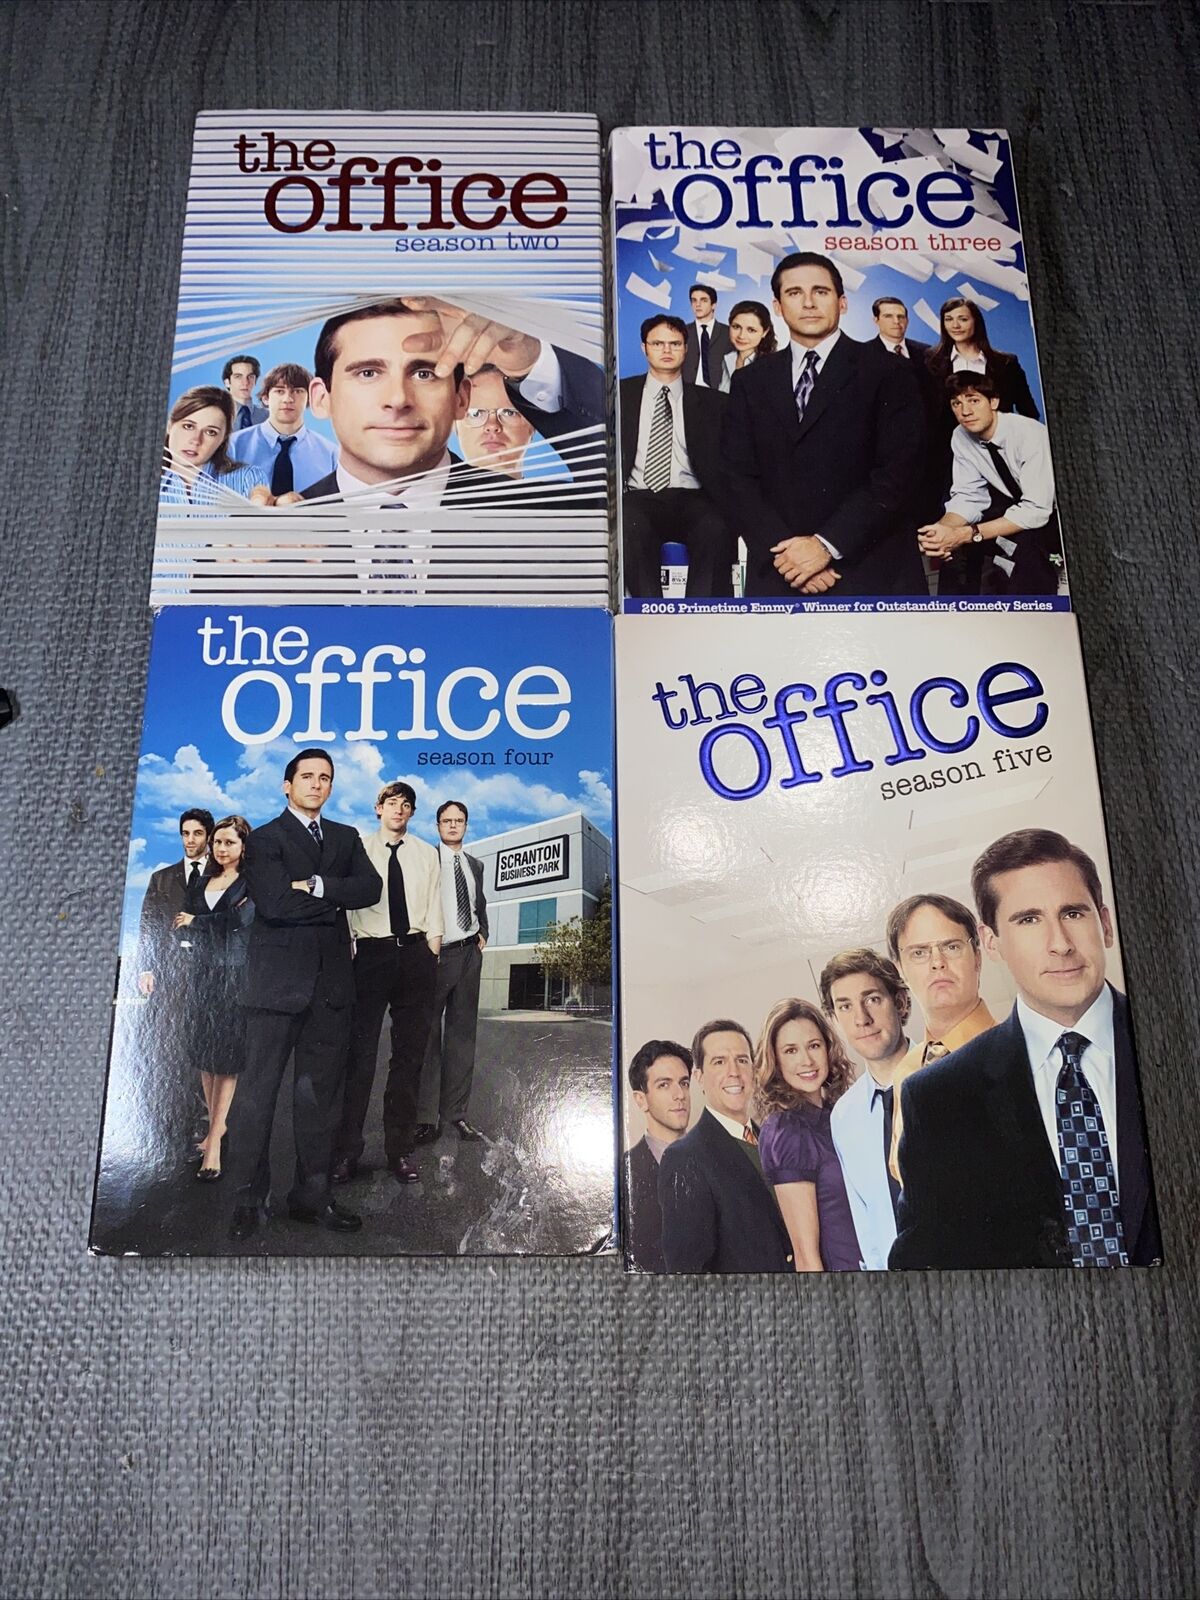 The Office: The Complete Series (DVD) for sale online | eBay